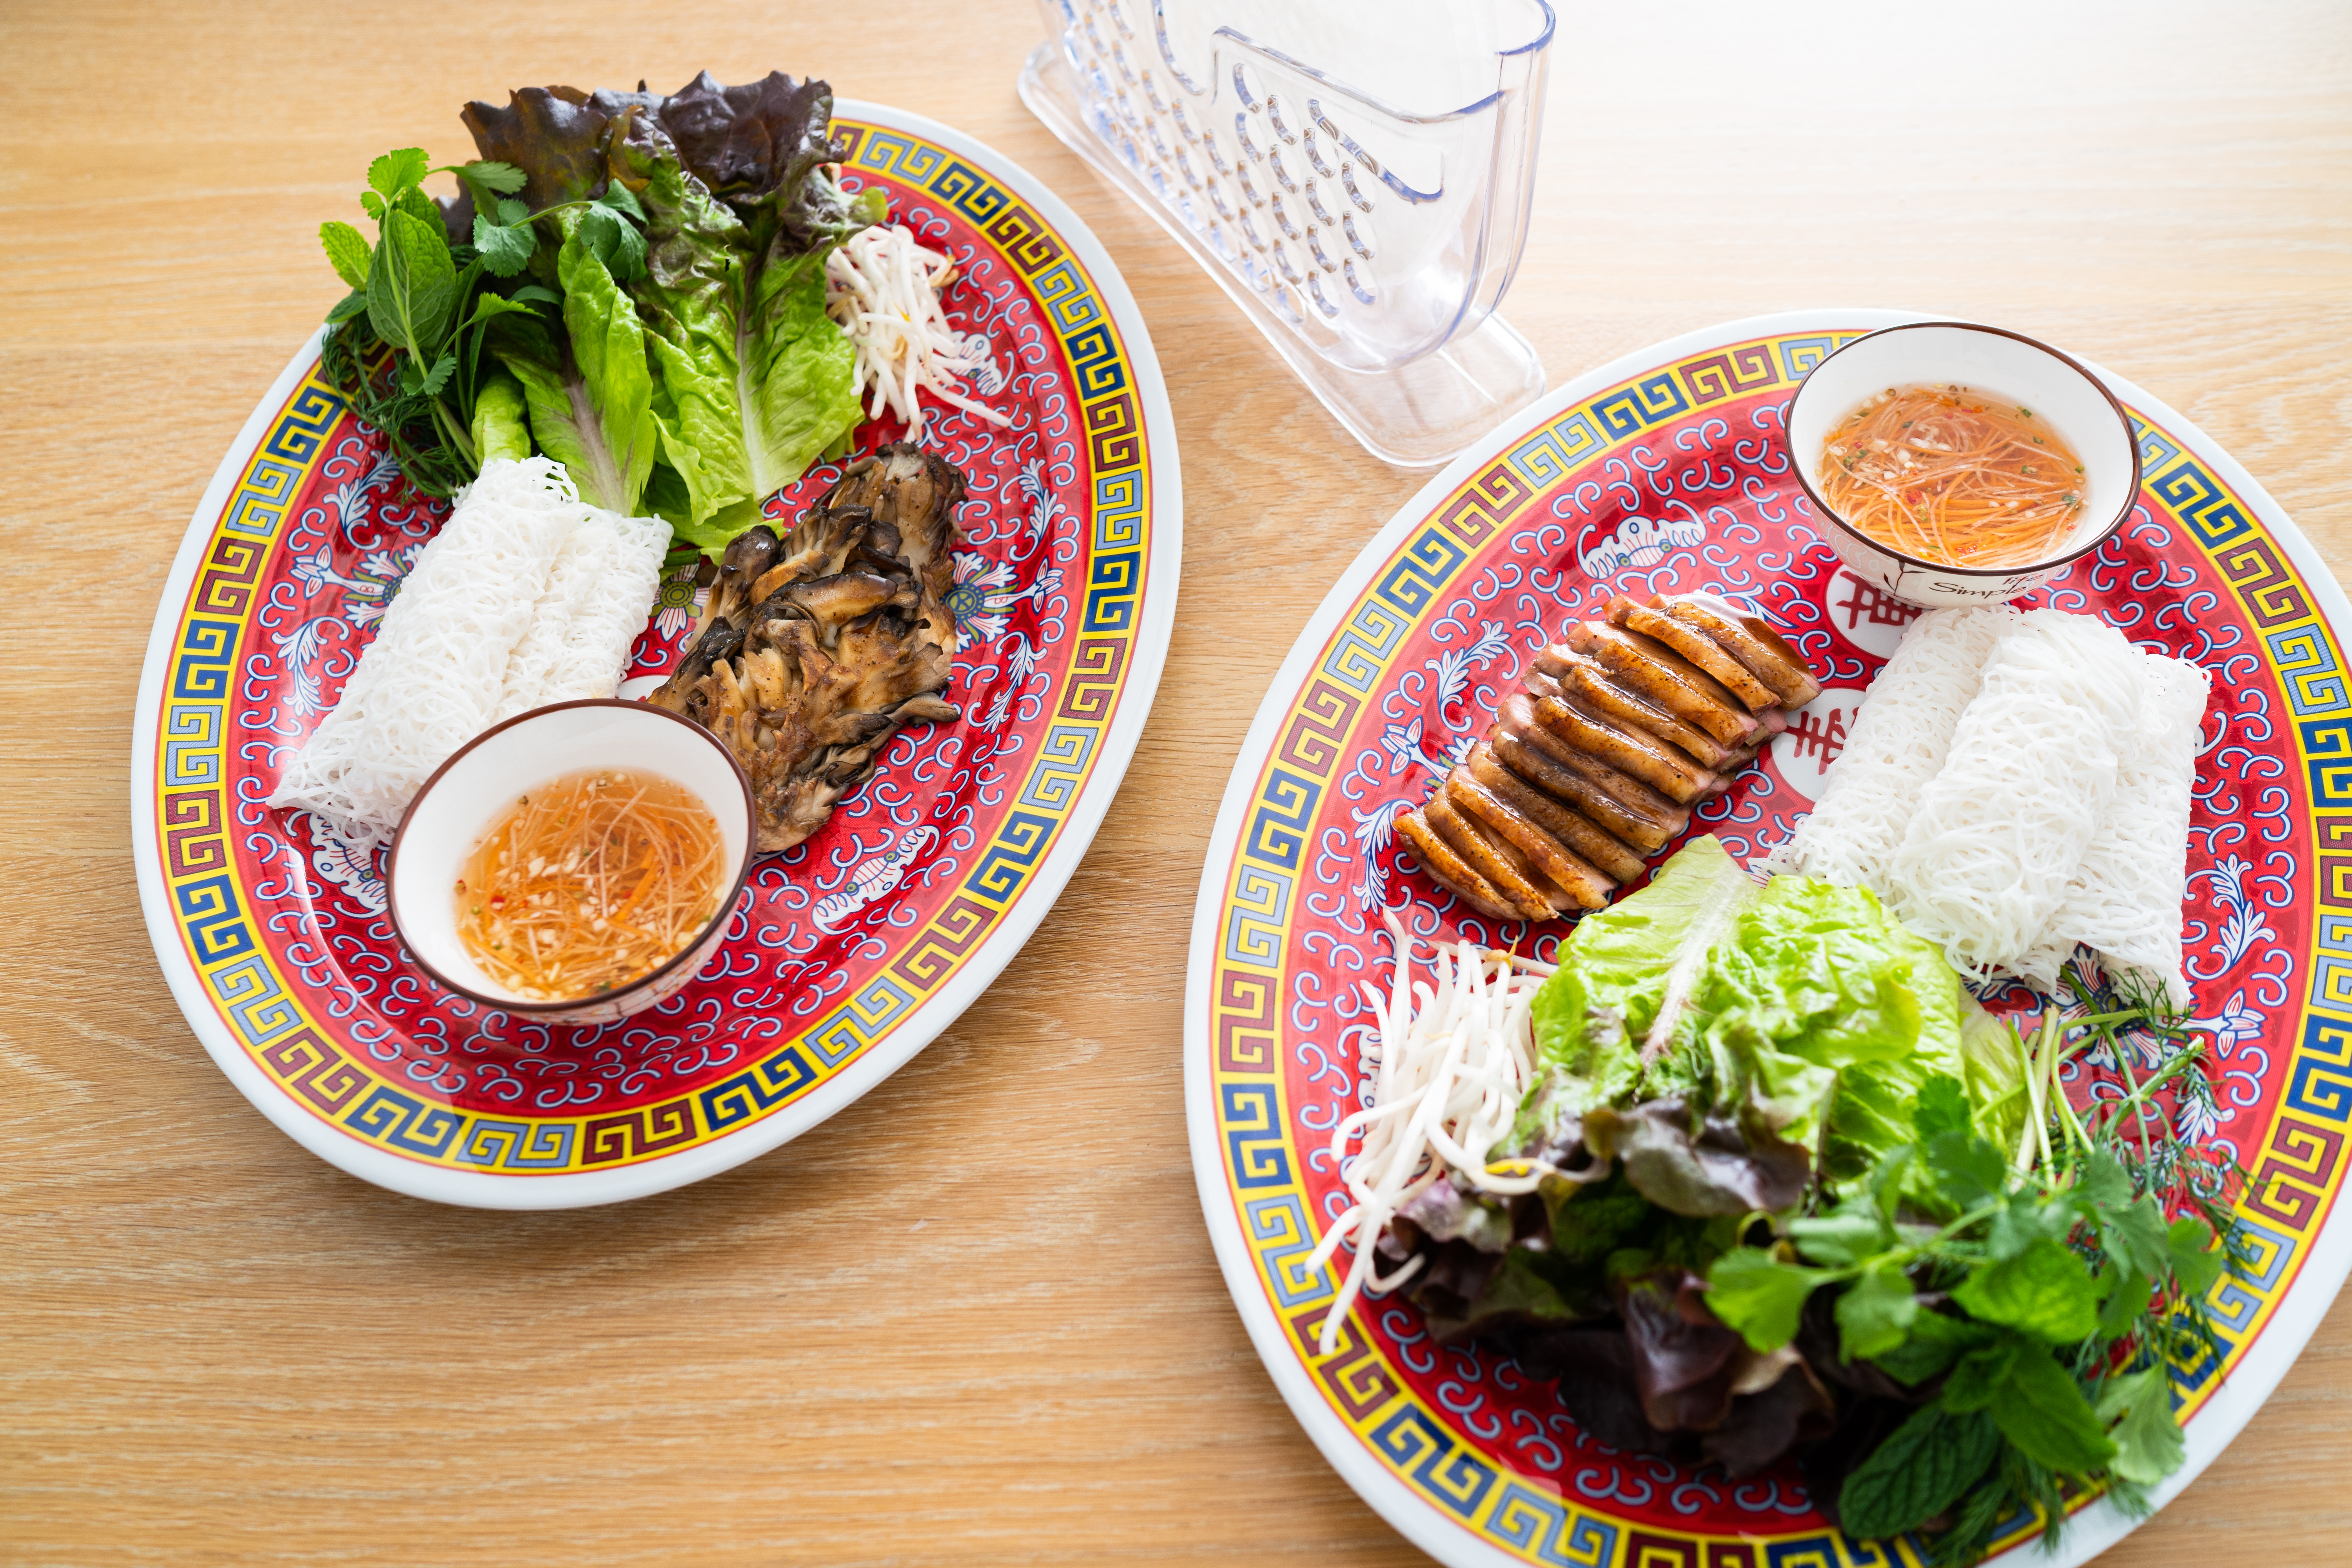 Two plates of rice papers, lettuces, herbs, and lan-roc pork on matching plates.